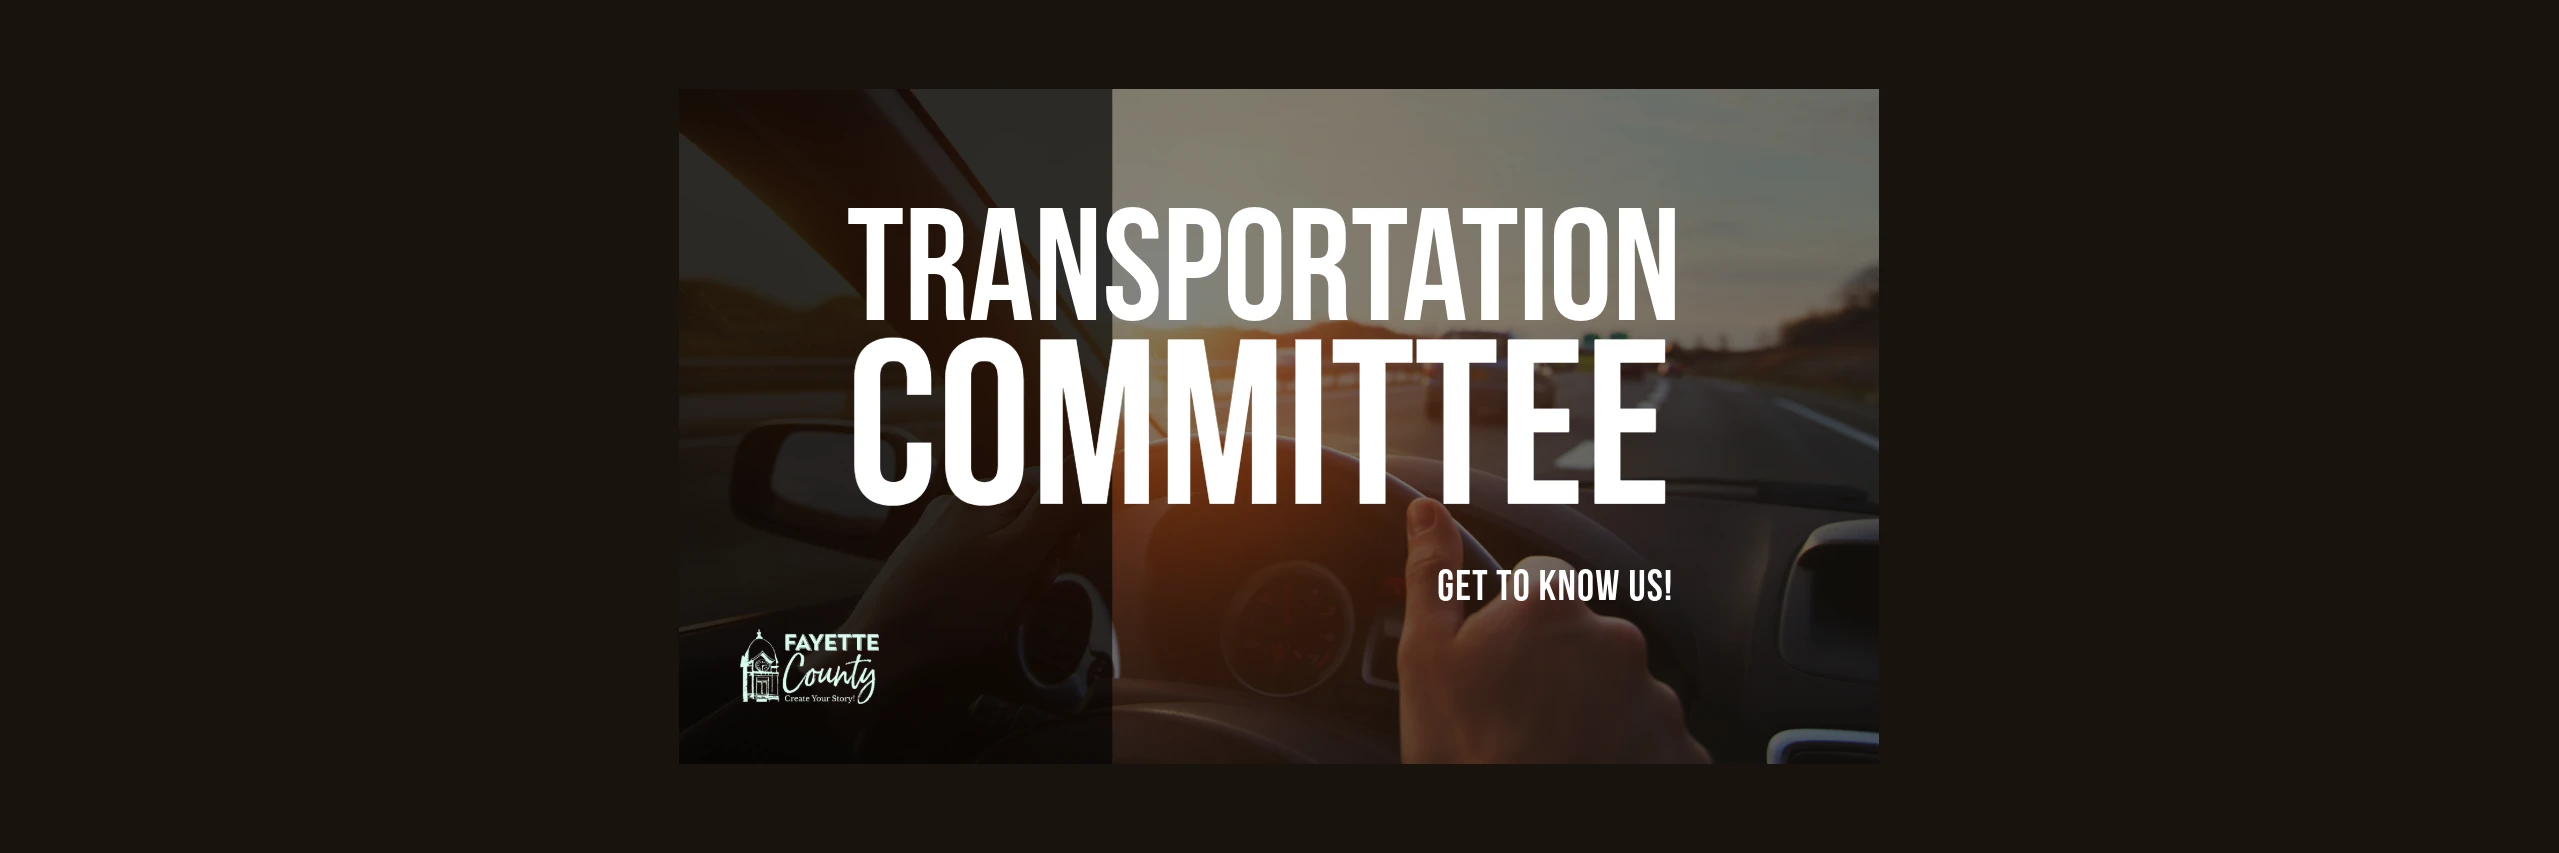 Fayette County Transportation Committee